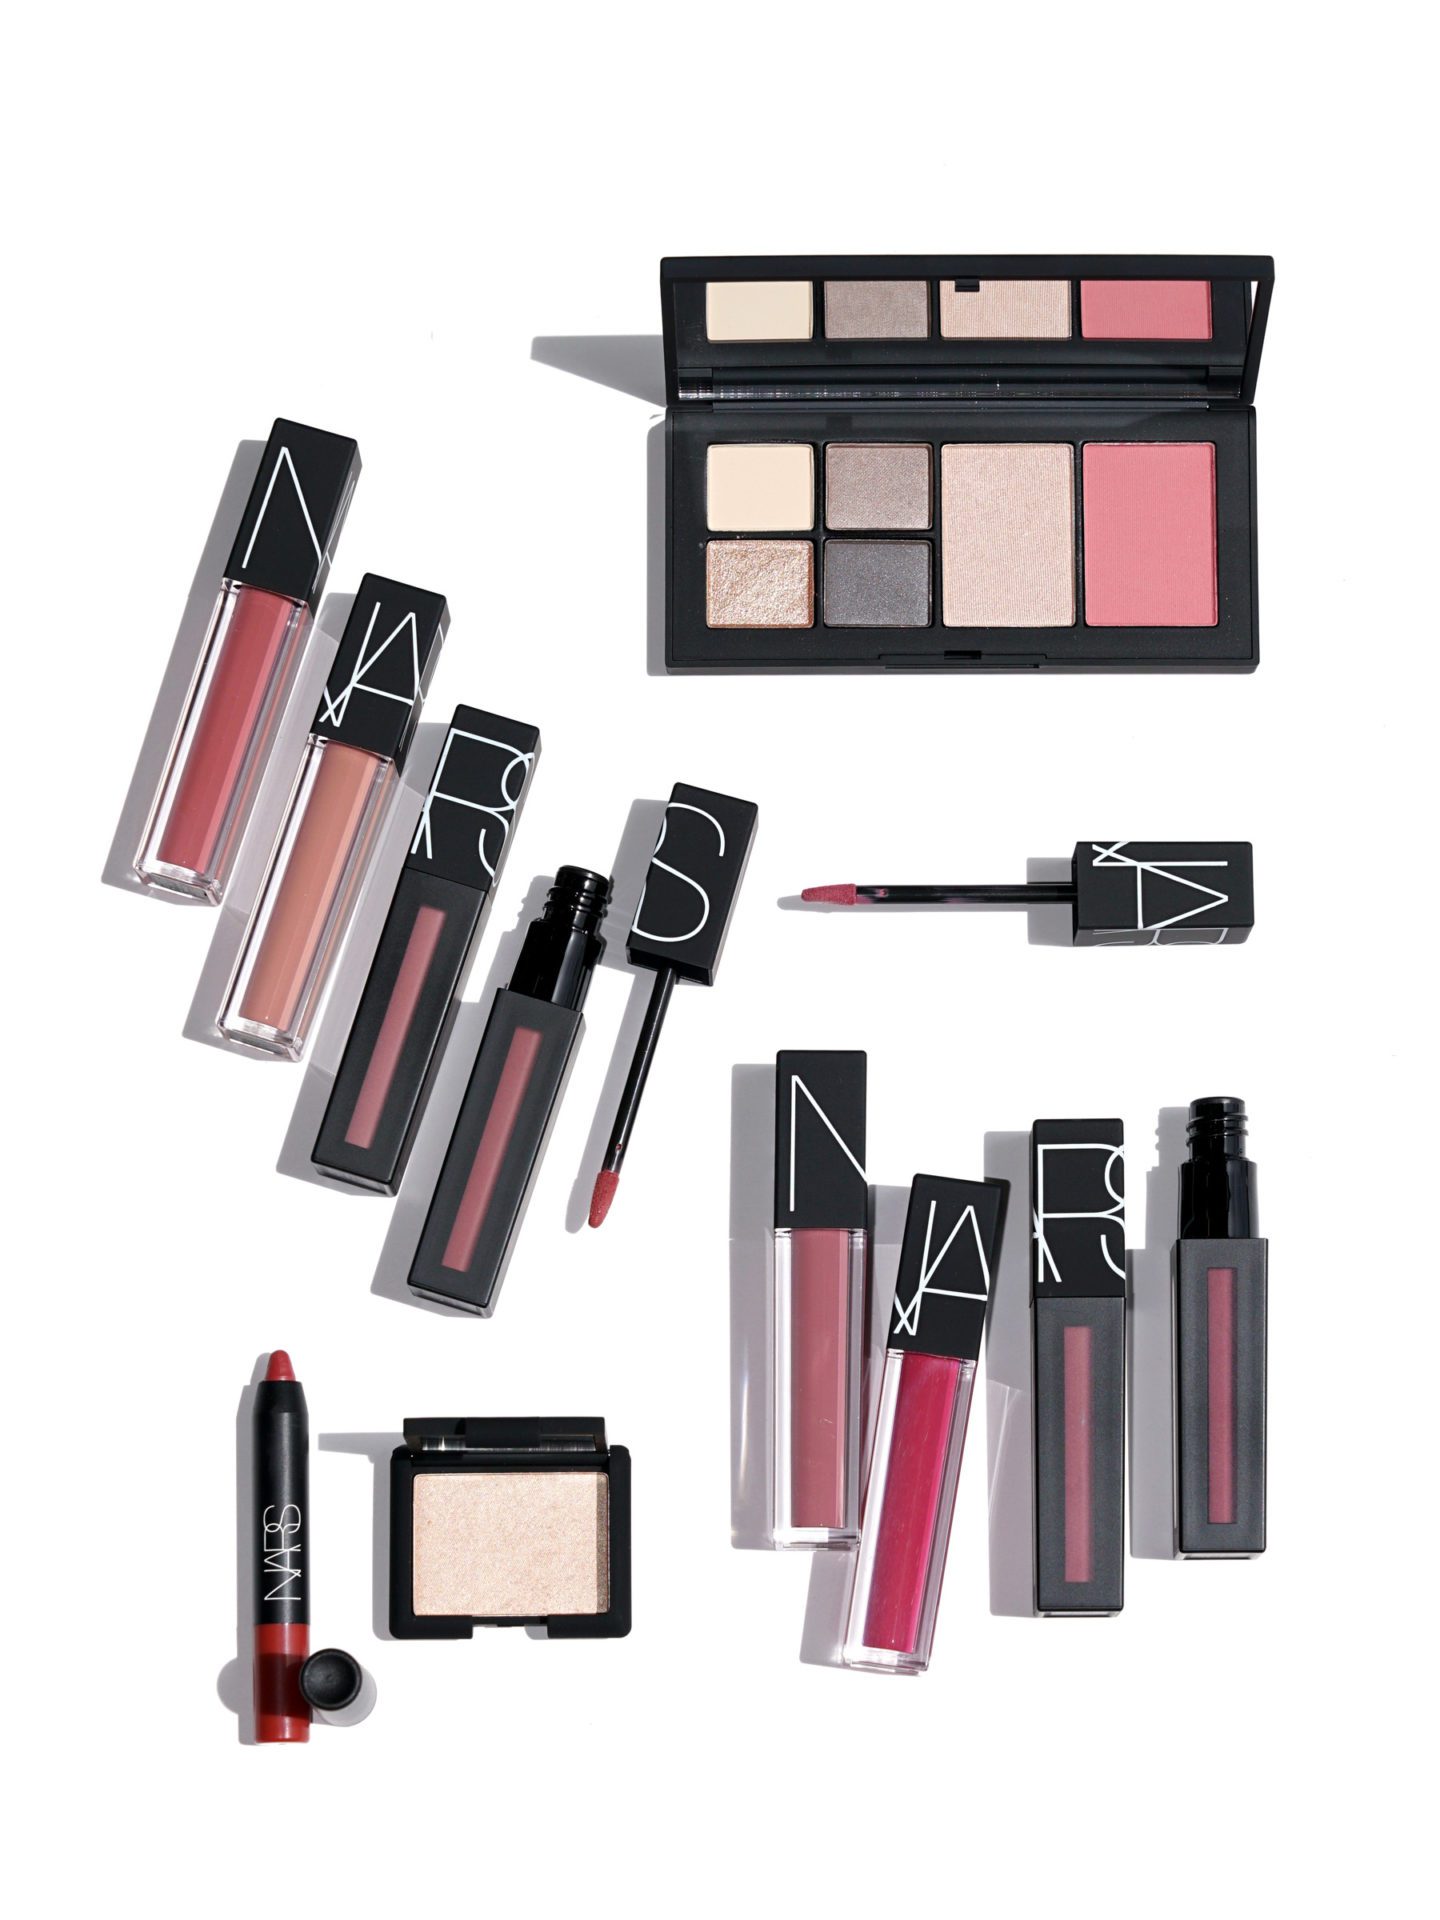 NARS Endless Summer Collection for Nordstrom